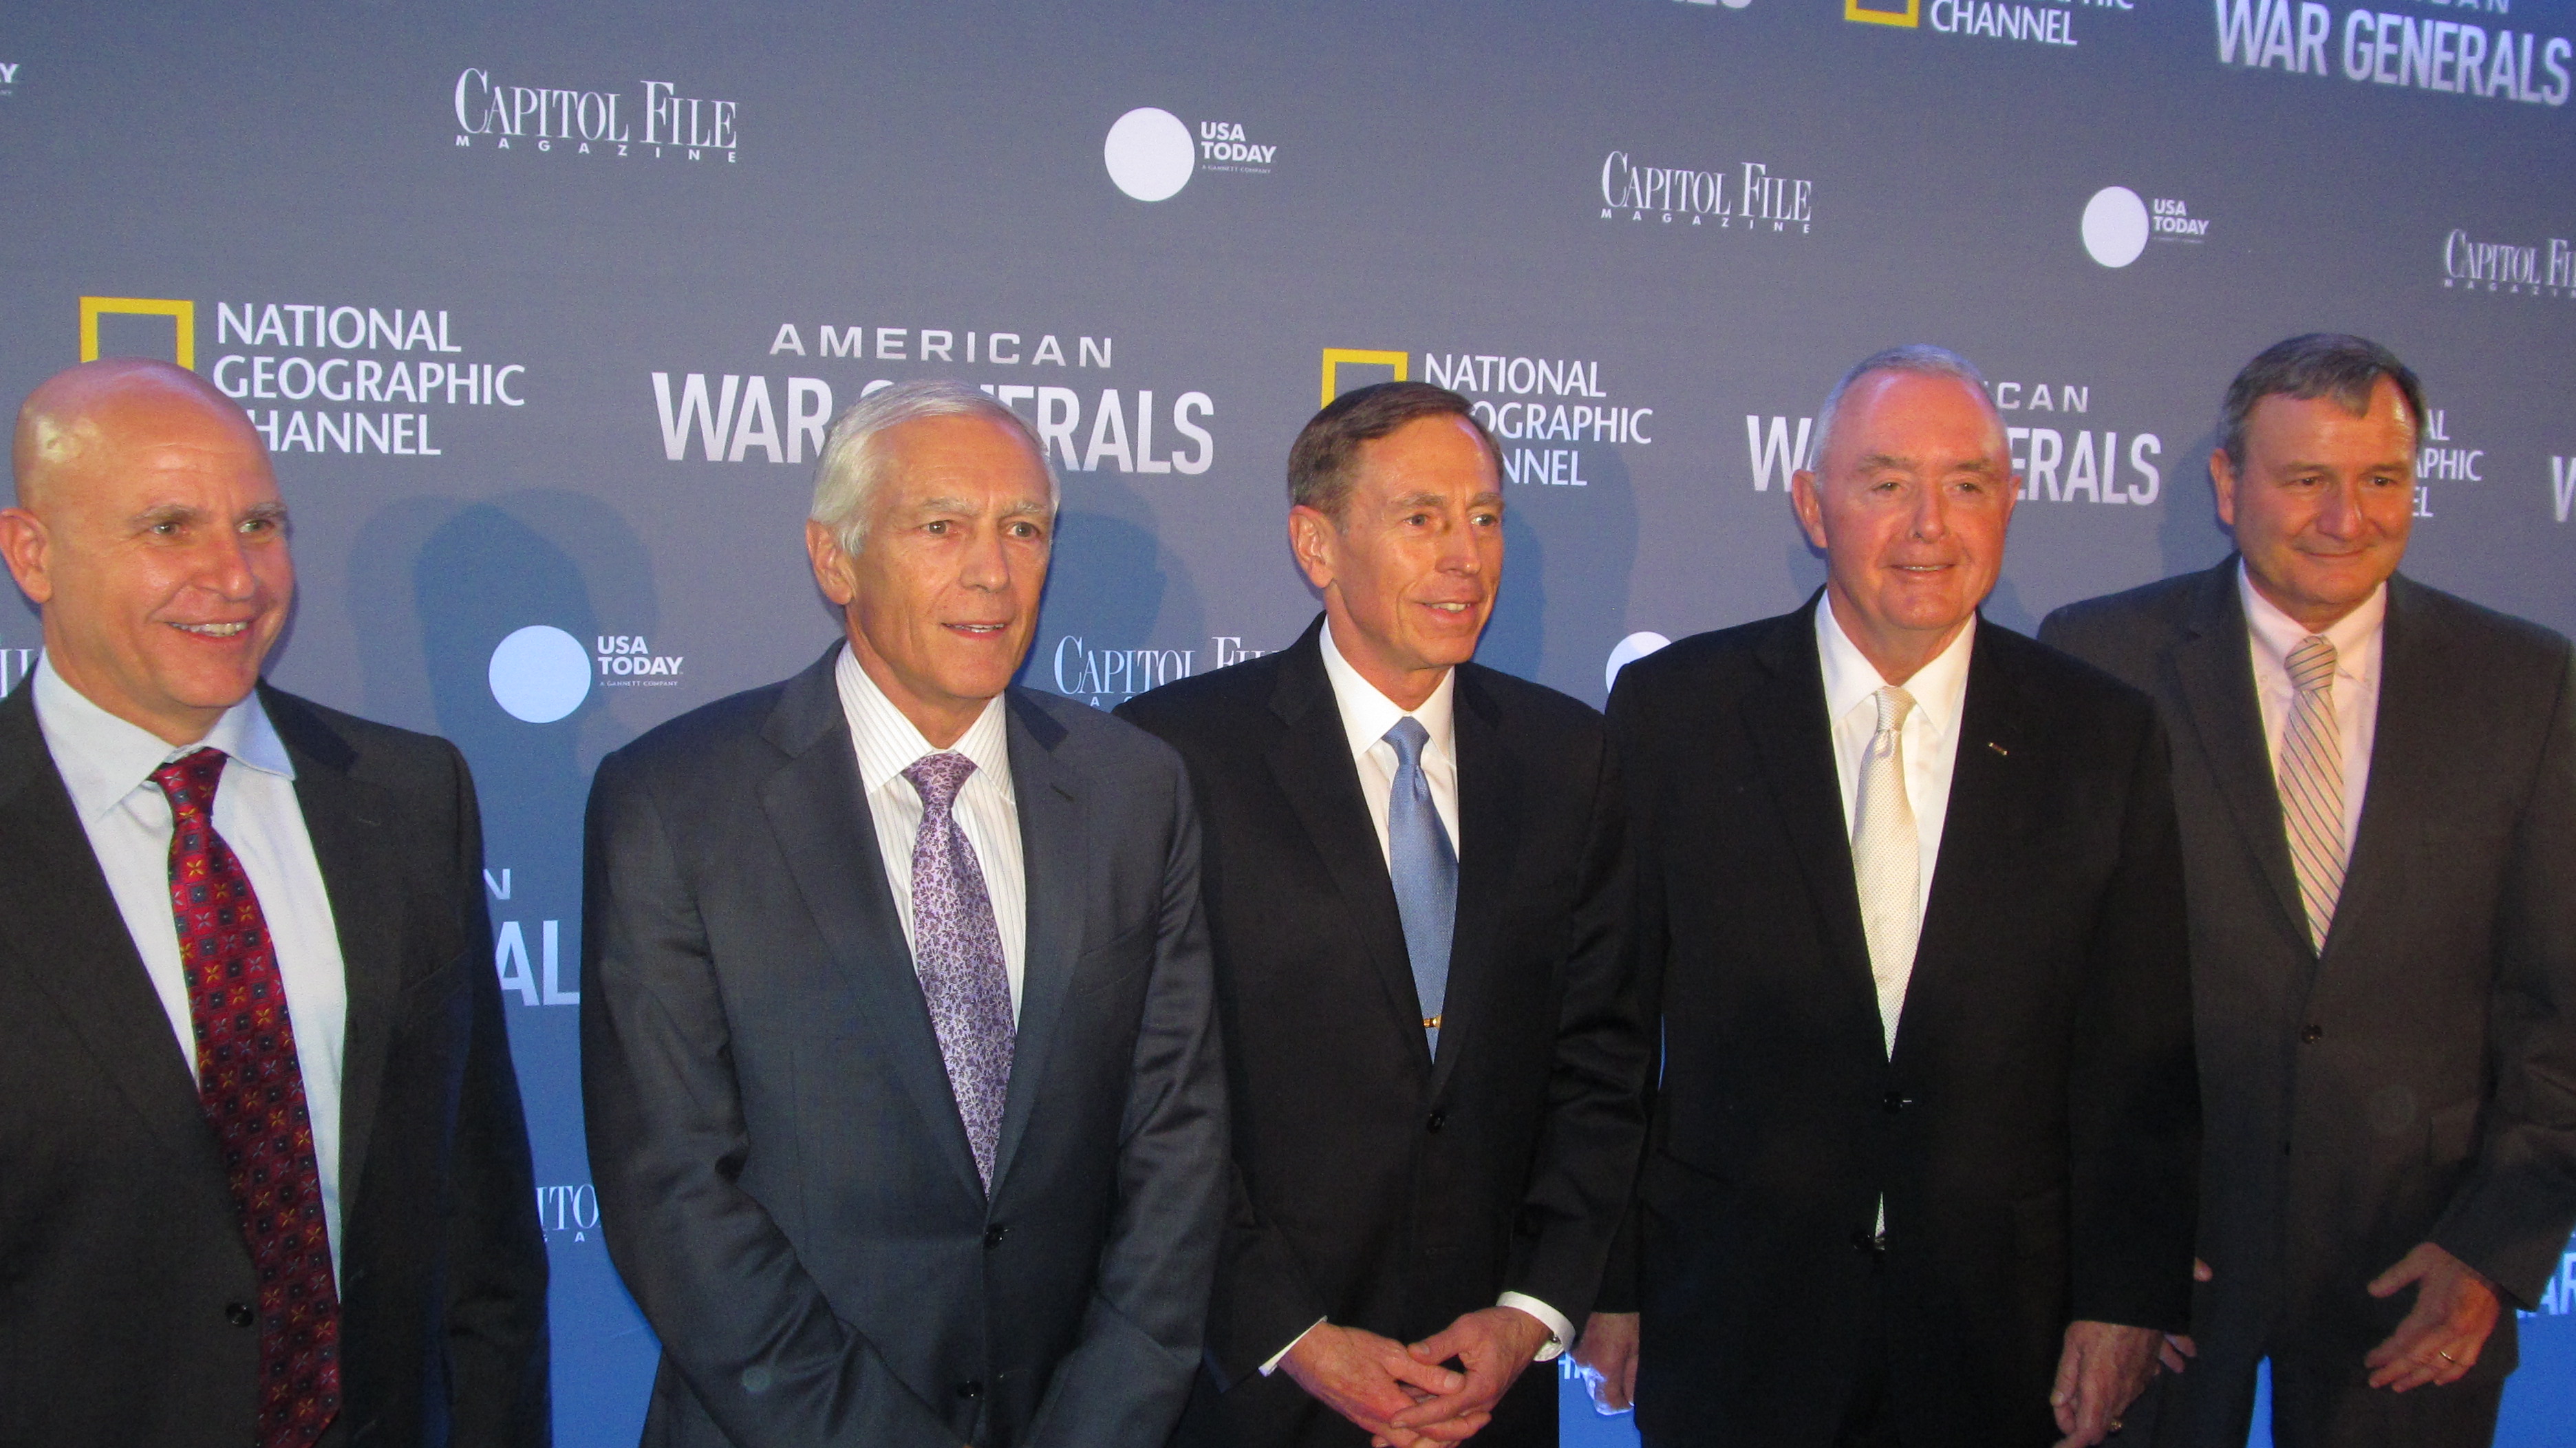 NatGeo Premieres #WarGenerals Doc With Four Star Fanfare